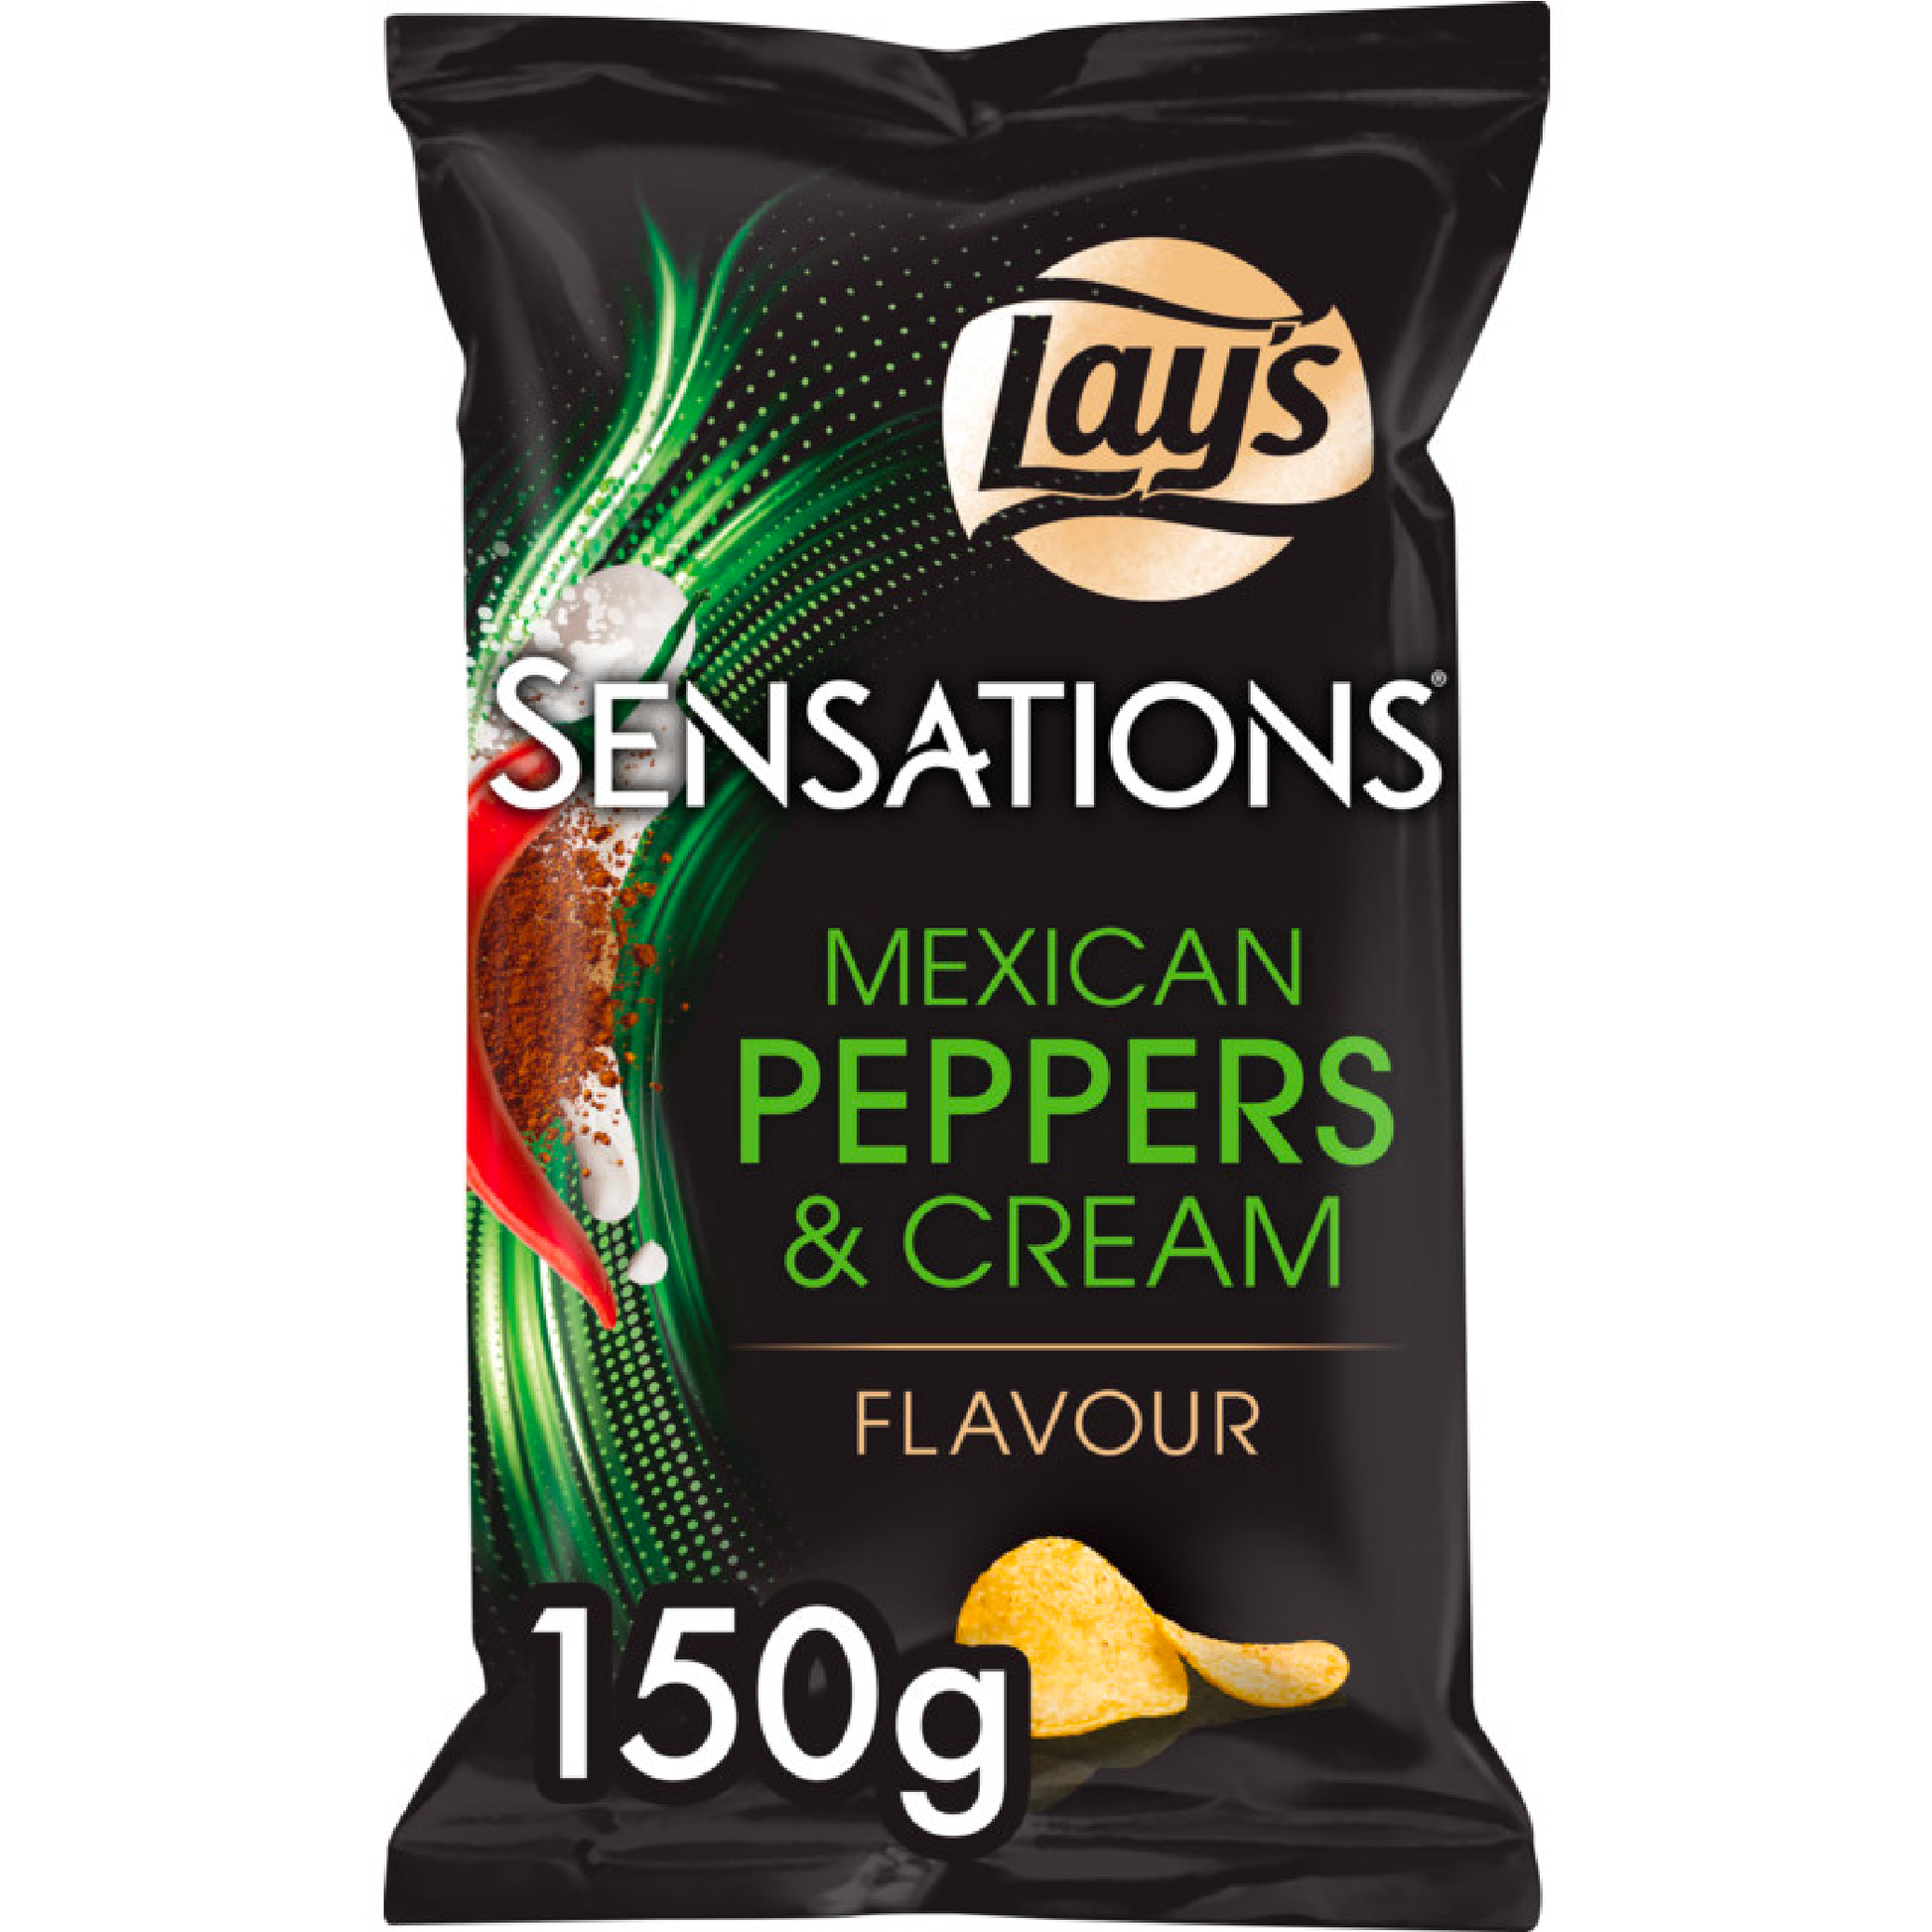 Lay's Sensations Mexican Pepper 150g - Snack-It